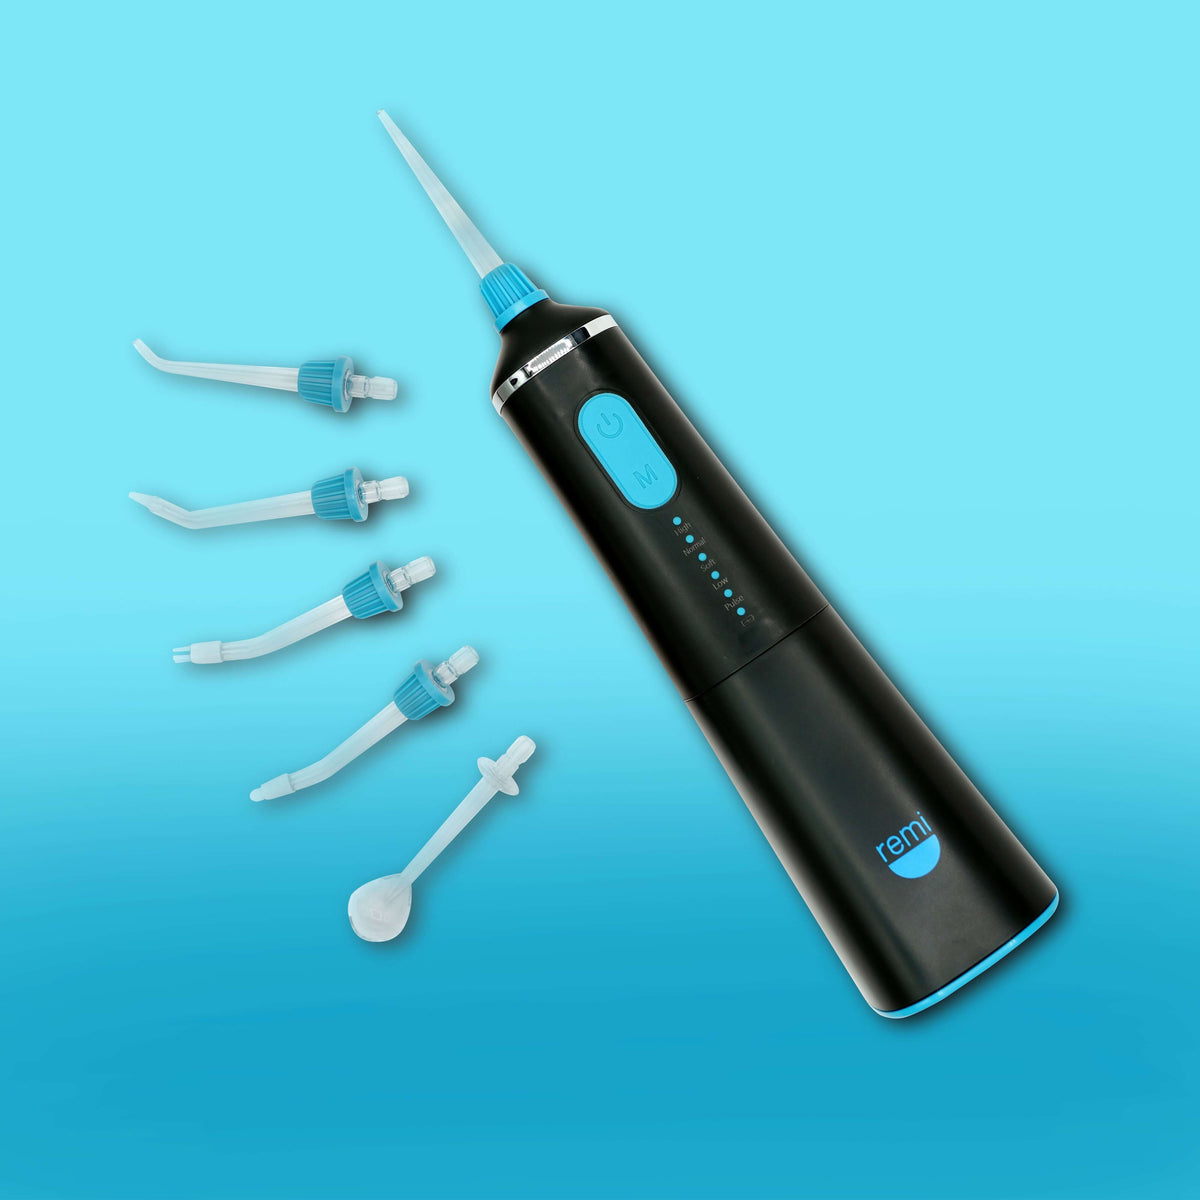 Cordless Water Flosser with multiple nozzle attachments on a blue background, designed for plaque removal.